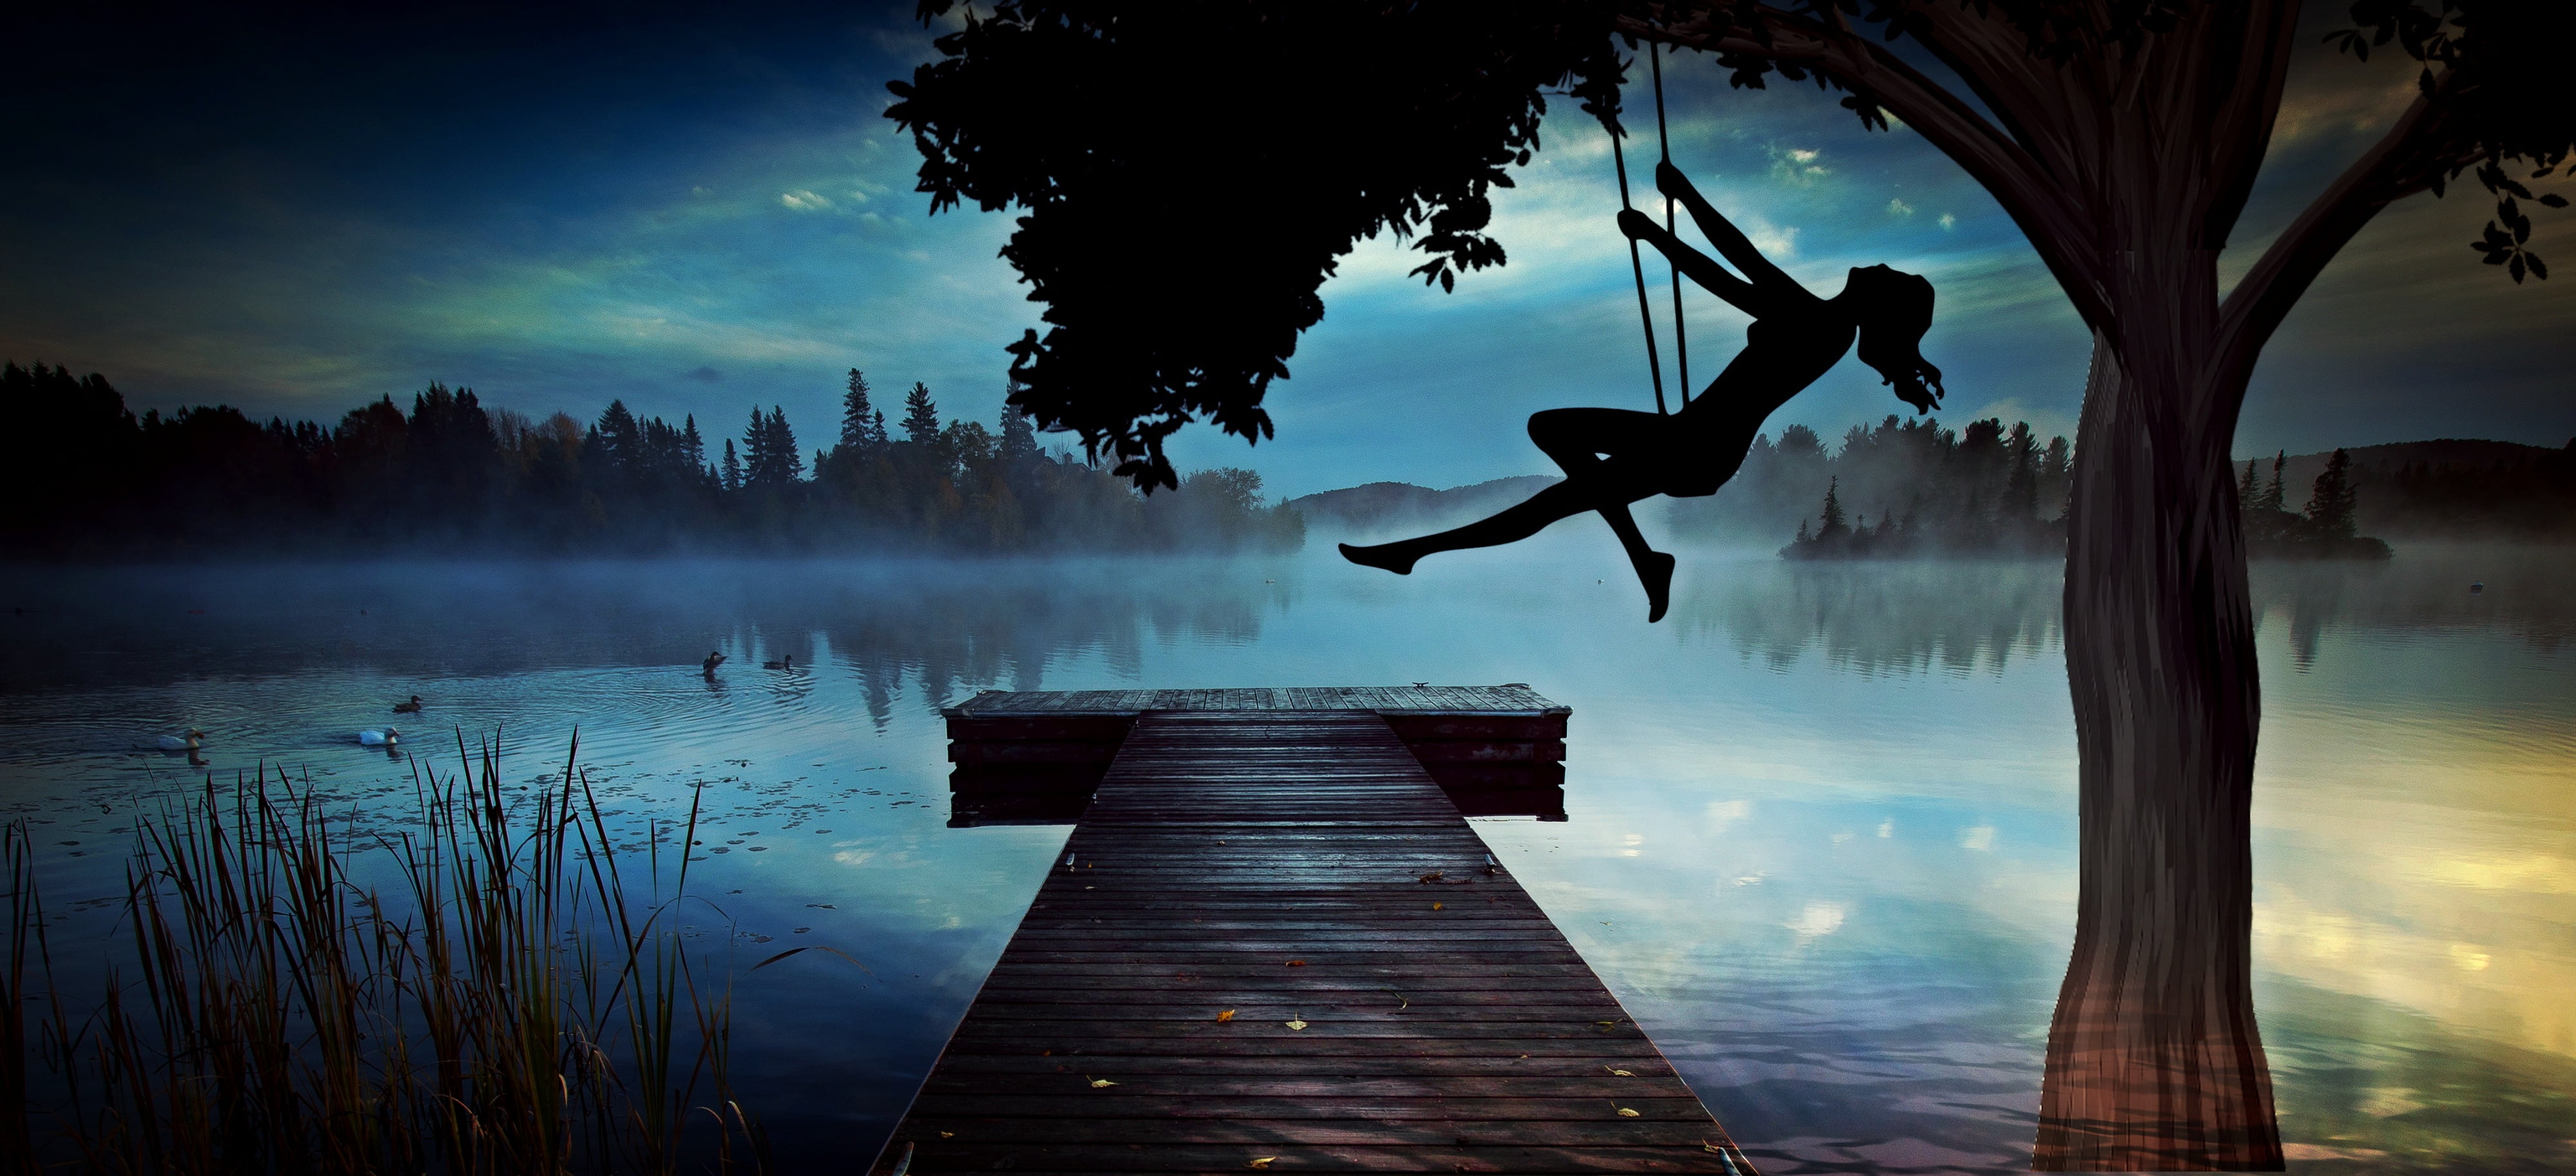 Silhouette Of Woman Riding On Swing Near River Dock - Inspirational Cute Life Quotes , HD Wallpaper & Backgrounds